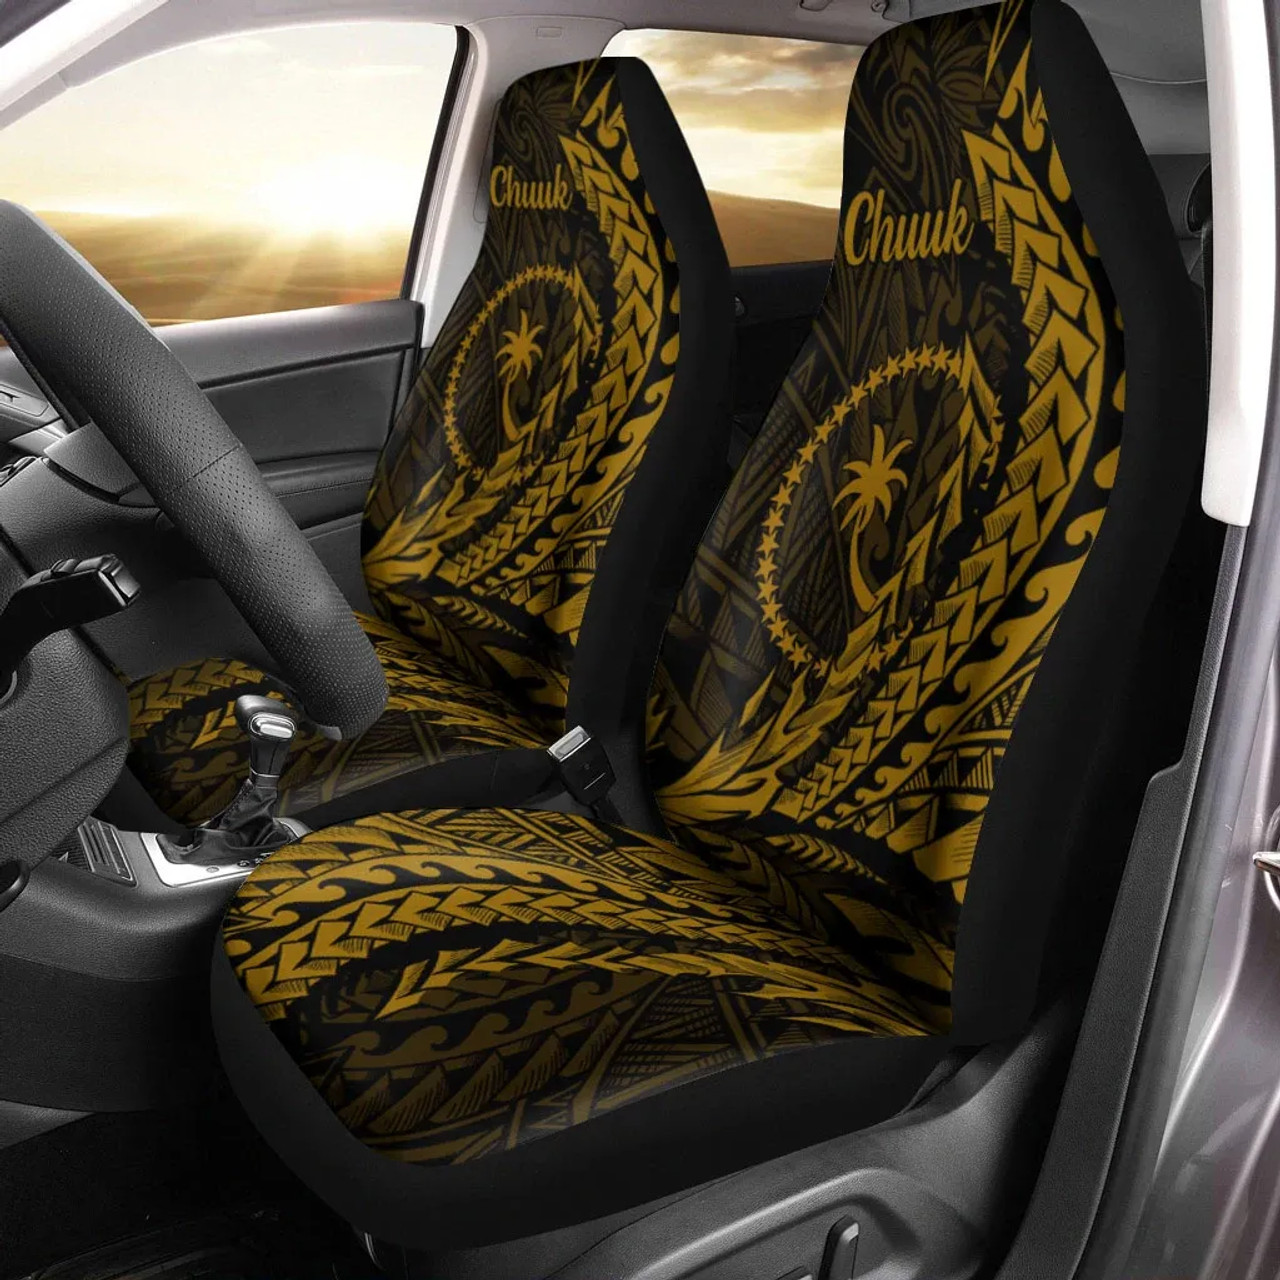 Chuuk Car Seat Cover - Wings Style